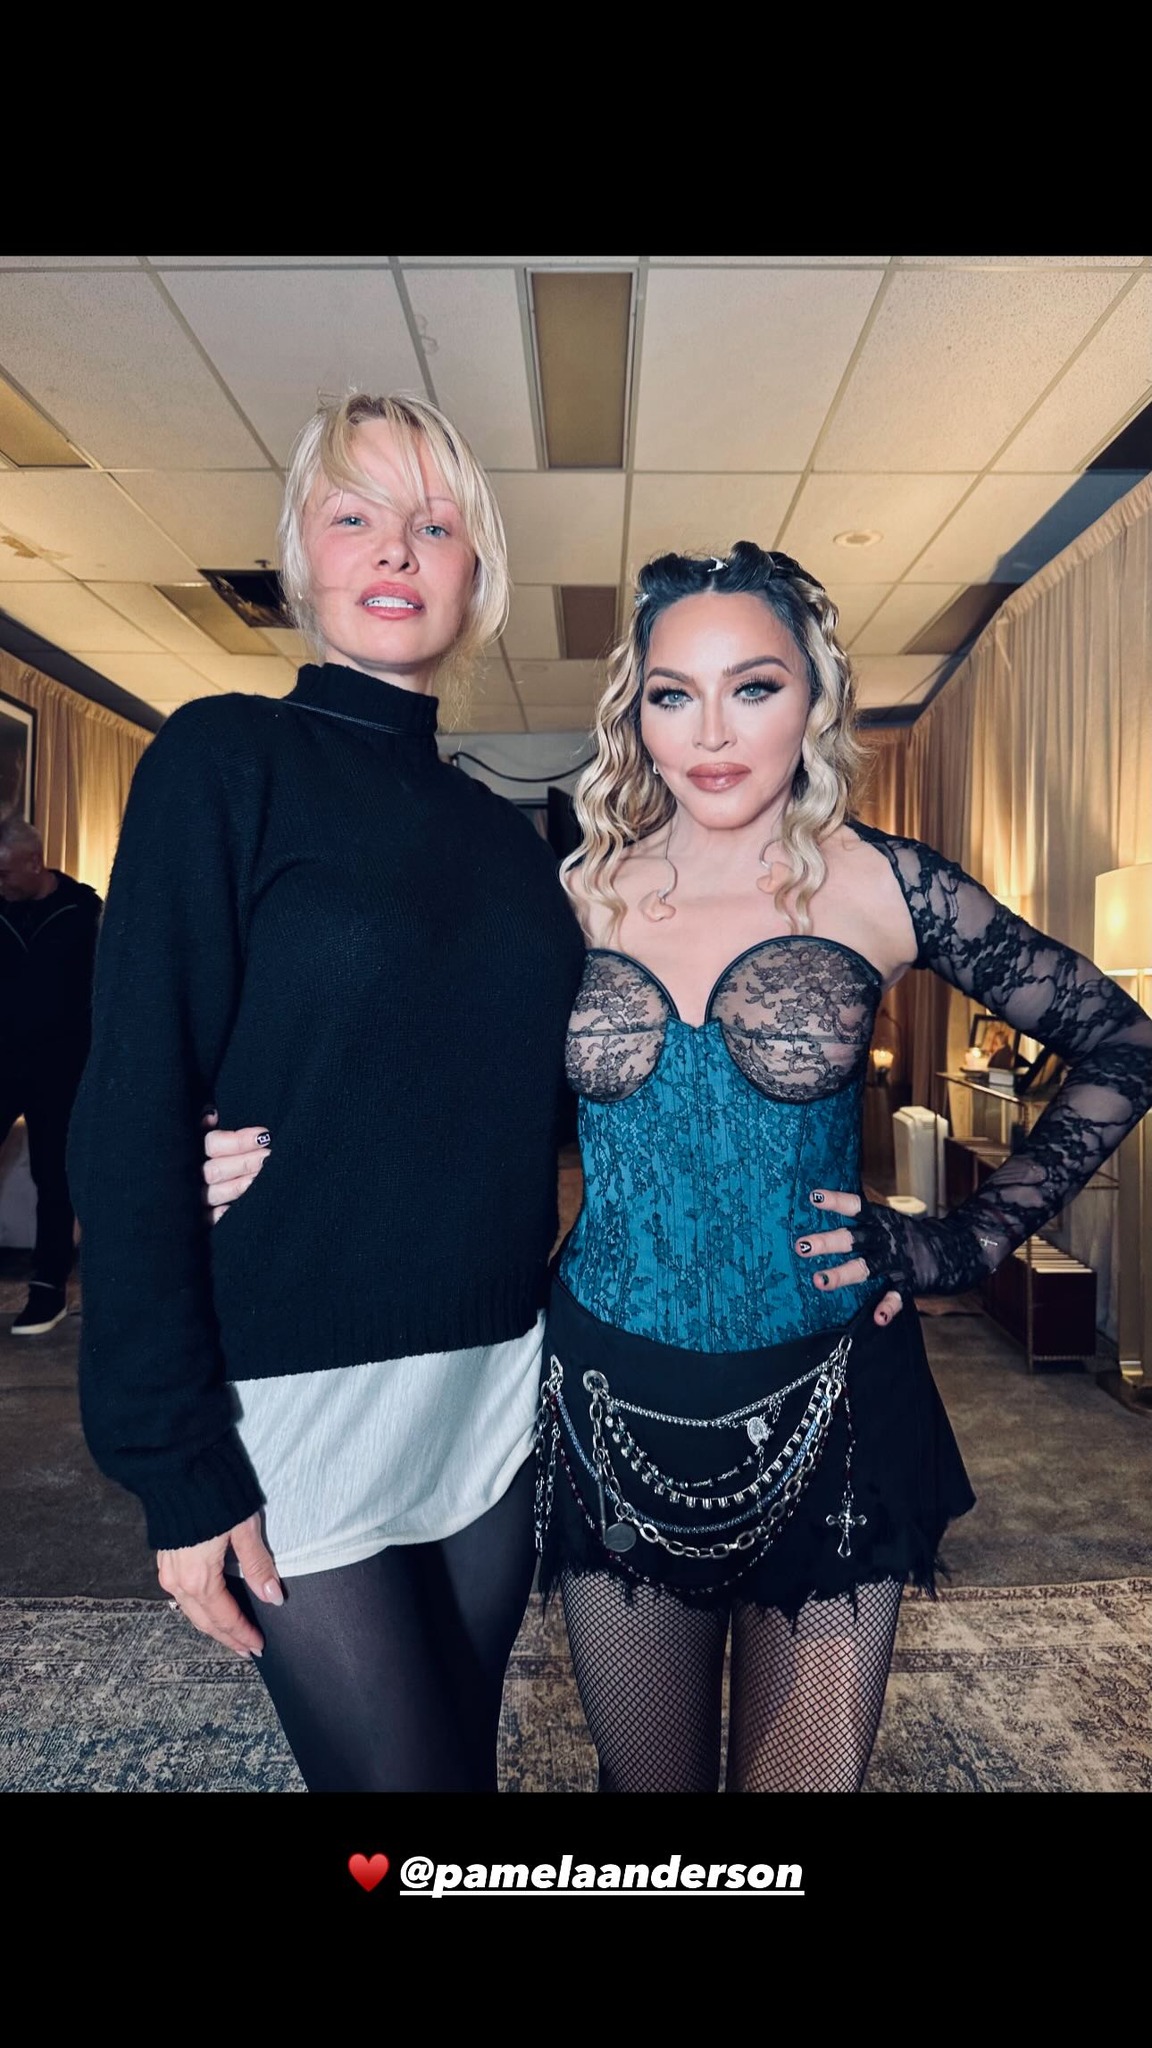 She reunited with Pamela Anderson backstage in Vancouver